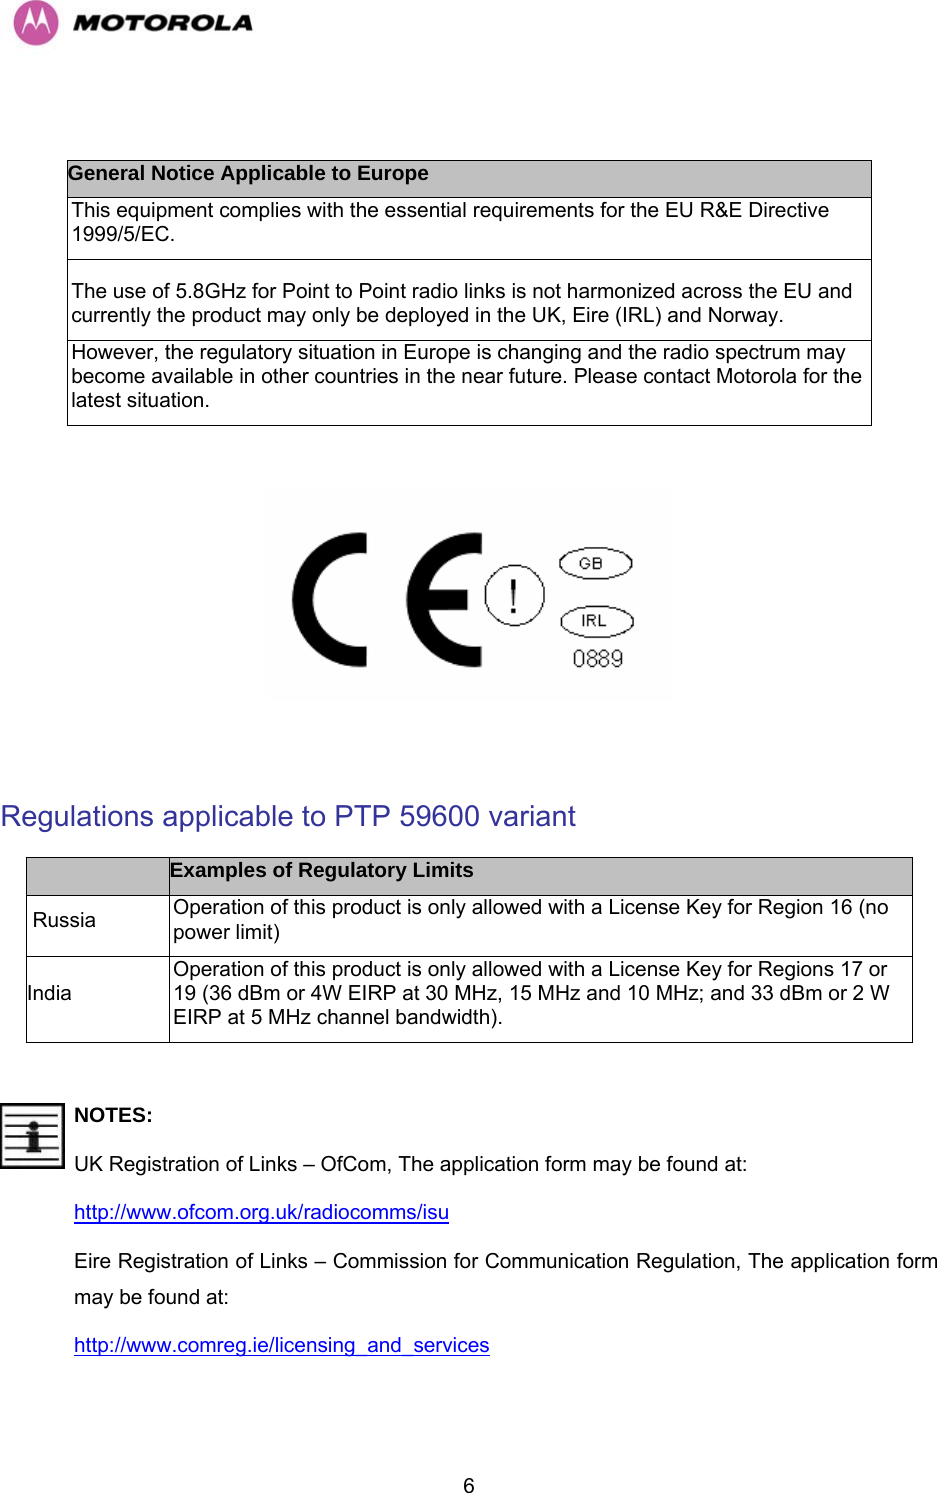   6 General Notice Applicable to Europe This equipment complies with the essential requirements for the EU R&amp;E Directive 1999/5/EC. The use of 5.8GHz for Point to Point radio links is not harmonized across the EU and currently the product may only be deployed in the UK, Eire (IRL) and Norway. However, the regulatory situation in Europe is changing and the radio spectrum may become available in other countries in the near future. Please contact Motorola for the latest situation.    Regulations applicable to PTP 59600 variant  Examples of Regulatory Limits  Russia  Operation of this product is only allowed with a License Key for Region 16 (no power limit) India Operation of this product is only allowed with a License Key for Regions 17 or 19 (36 dBm or 4W EIRP at 30 MHz, 15 MHz and 10 MHz; and 33 dBm or 2 W EIRP at 5 MHz channel bandwidth).   NOTES: UK Registration of Links – OfCom, The application form may be found at: http://www.ofcom.org.uk/radiocomms/isu  Eire Registration of Links – Commission for Communication Regulation, The application form may be found at: http://www.comreg.ie/licensing_and_services 